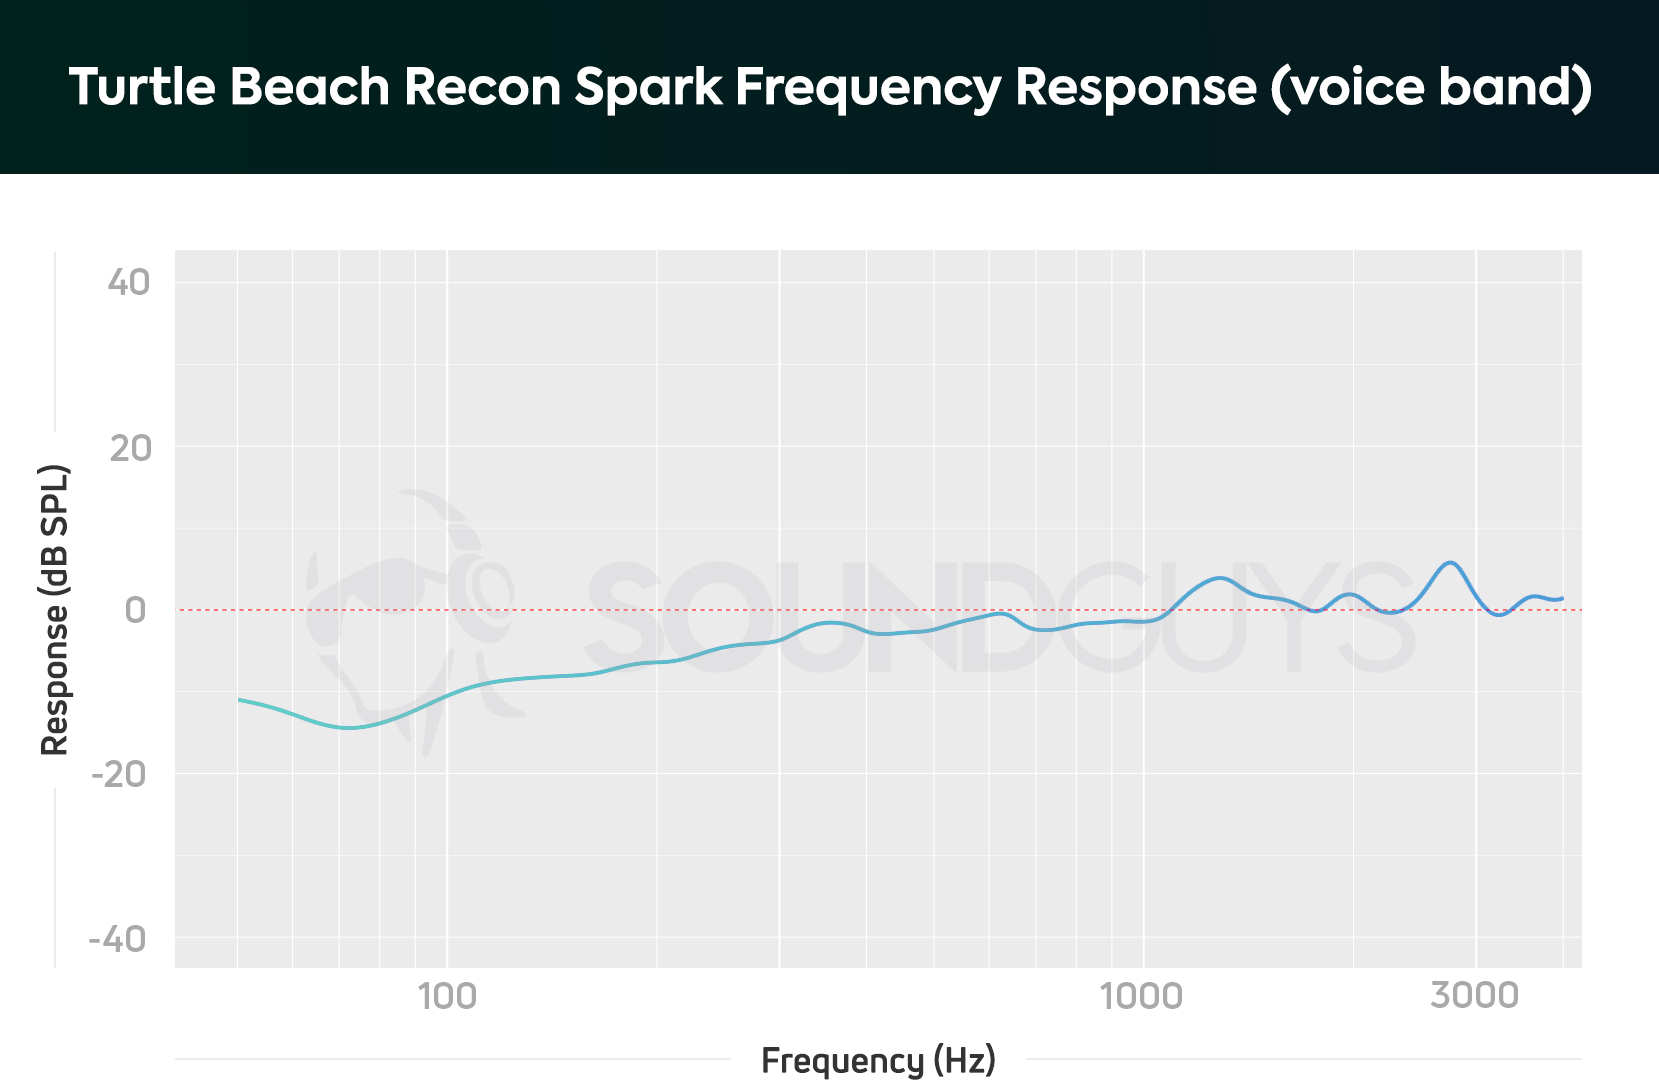 A frequency response chart for The Turtle Beach Recon Spark gaming headset's microphone, which shows a notable under-emphasis in the bass range.